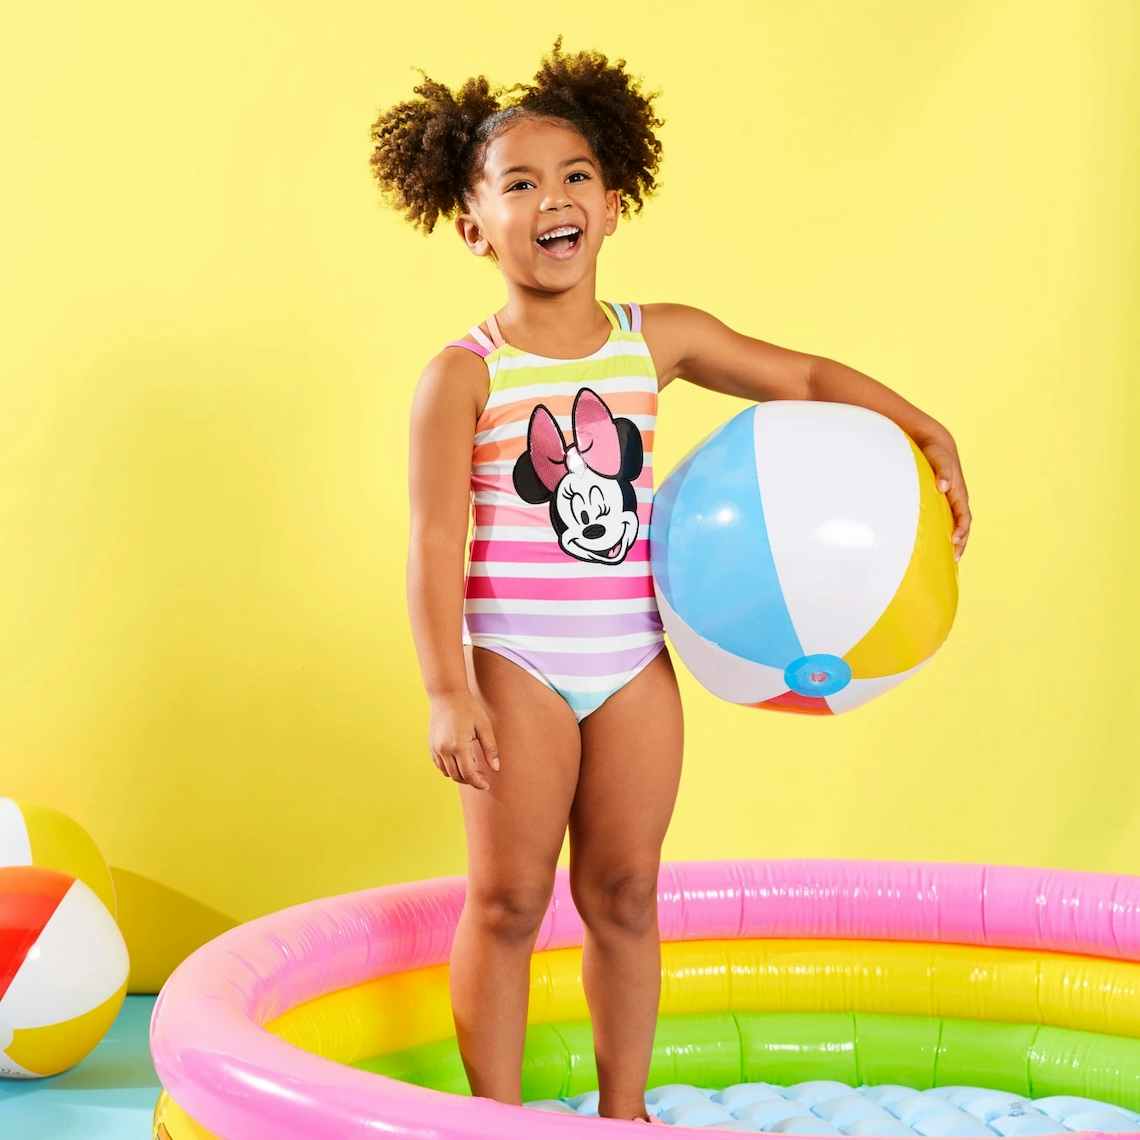 Little girl in swimsuit standing in kiddie pool holding a beach ball.